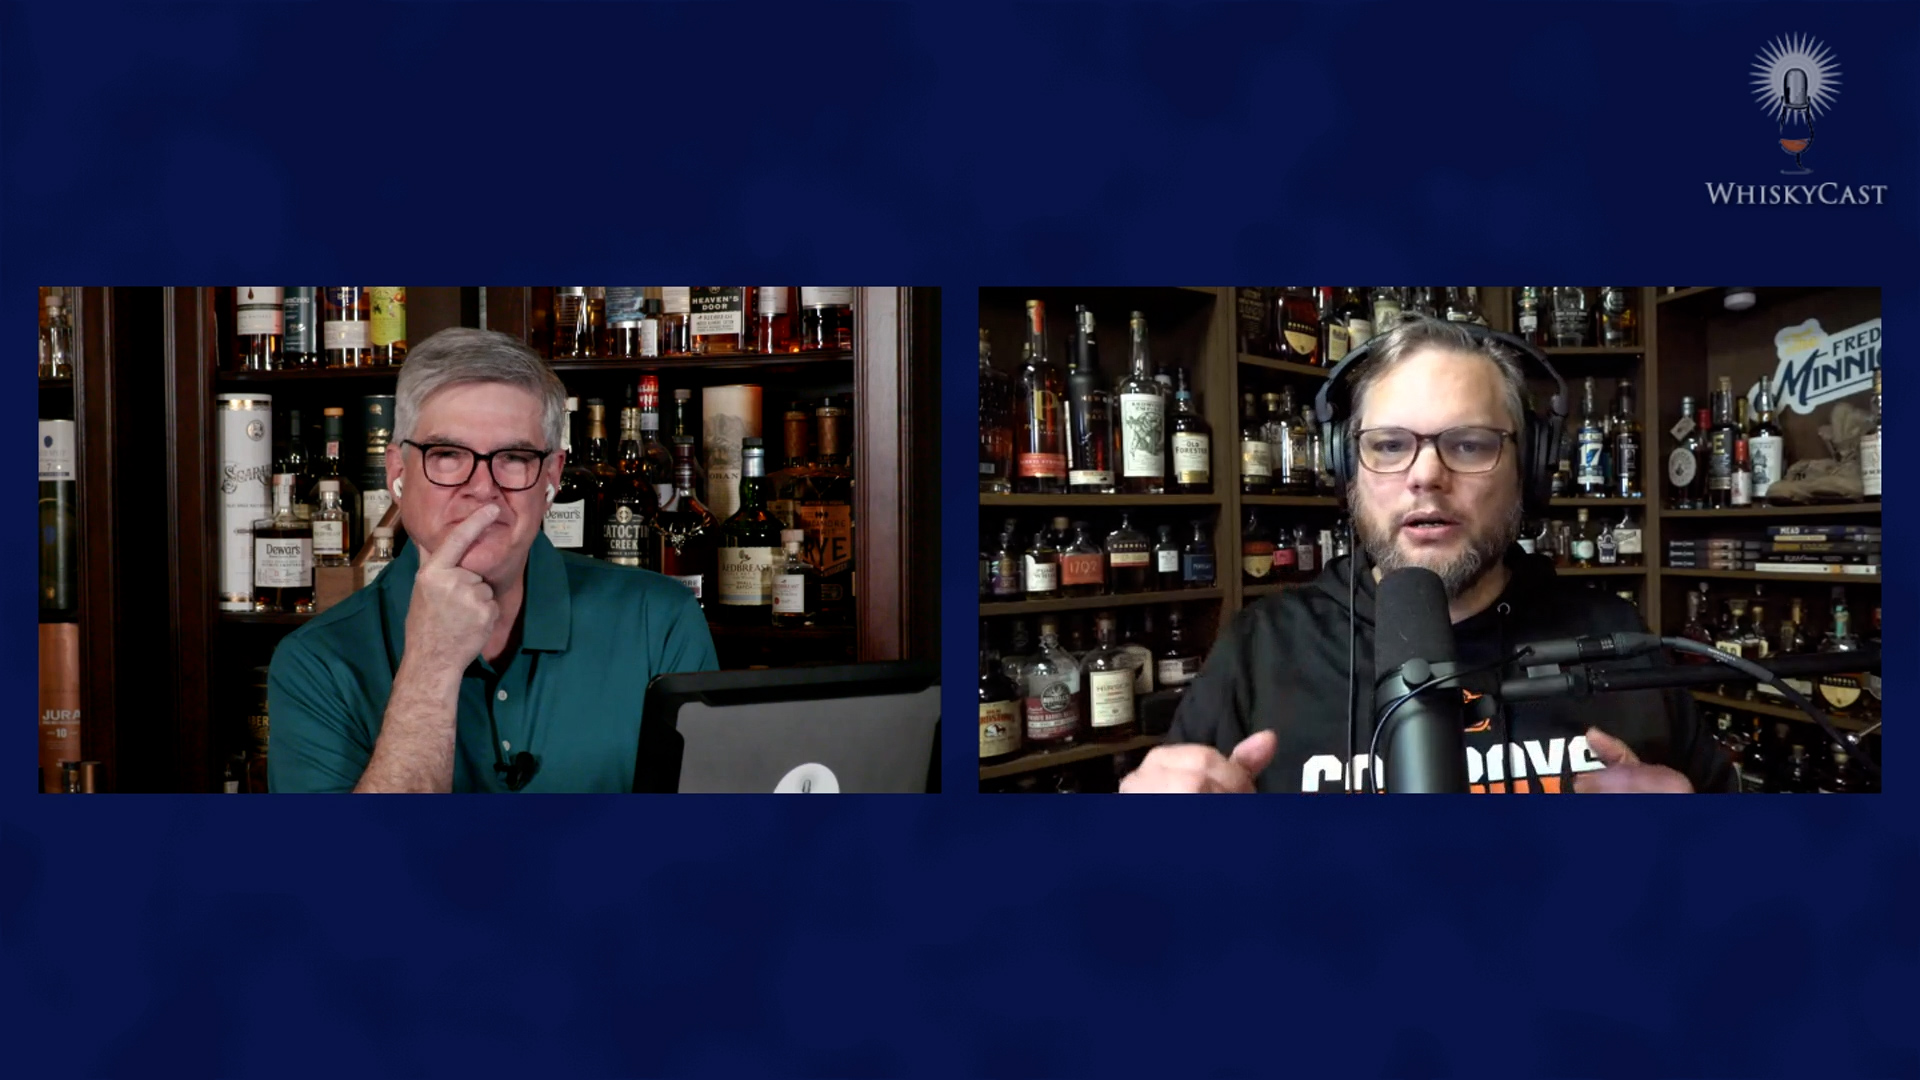 Fred Minnick joined us on Friday night's webcast. The on-demand replay is available now at the WhiskyCast YouTue channel, and the podcast version will be available soon.